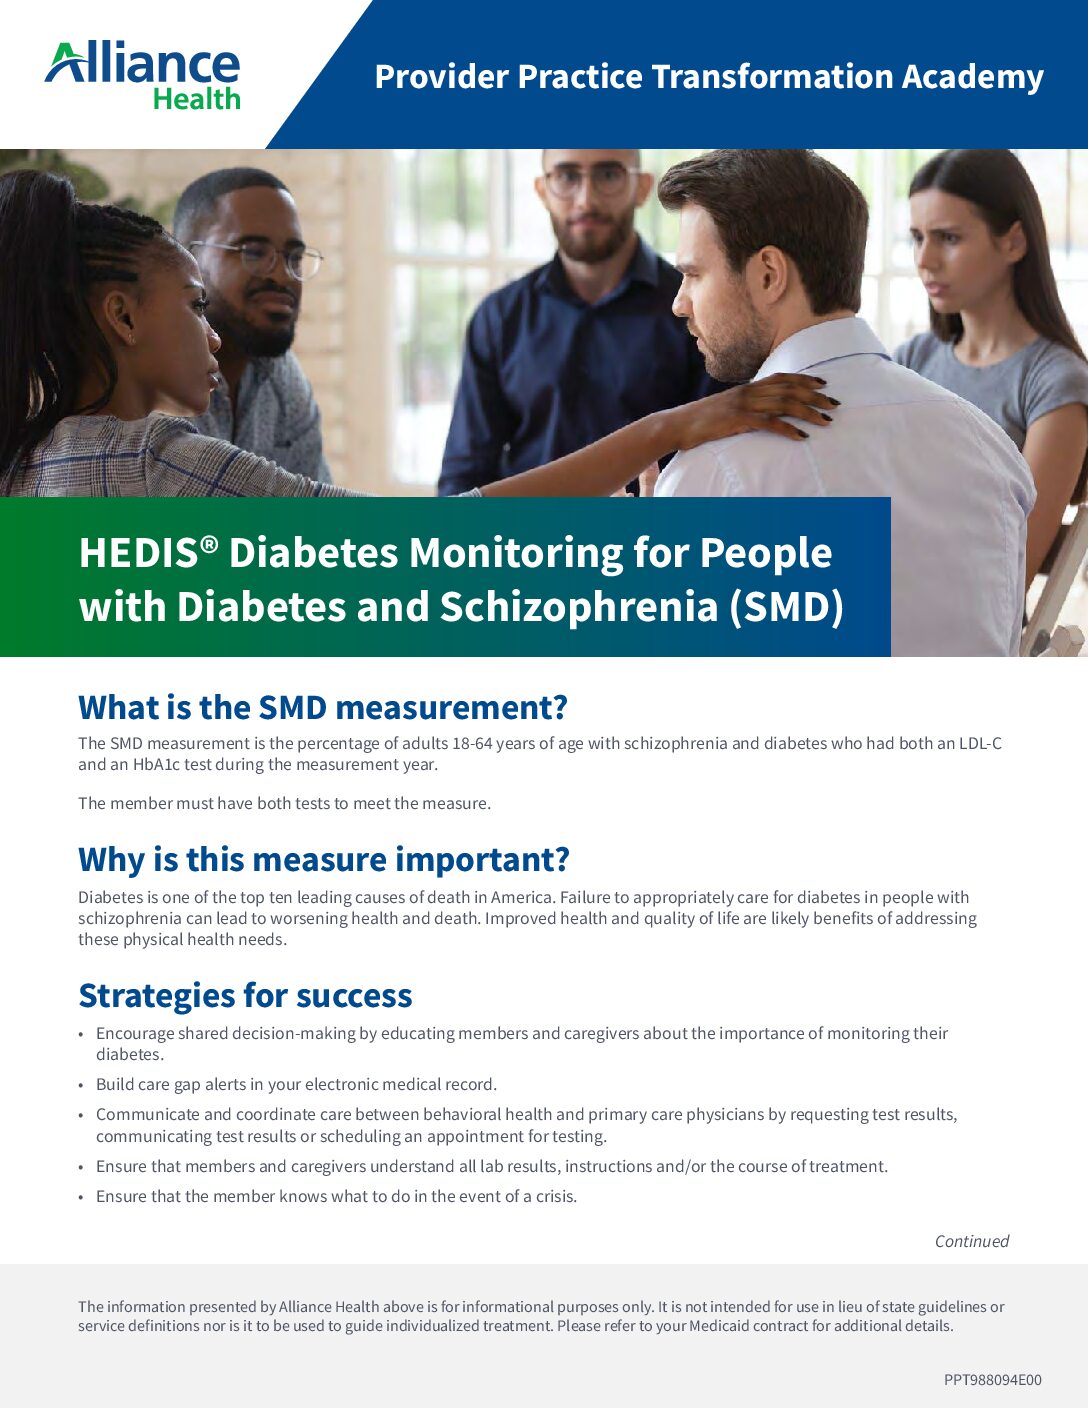 HEDIS® Diabetes Monitoring for People with Diabetes and Schizophrenia (SMD)